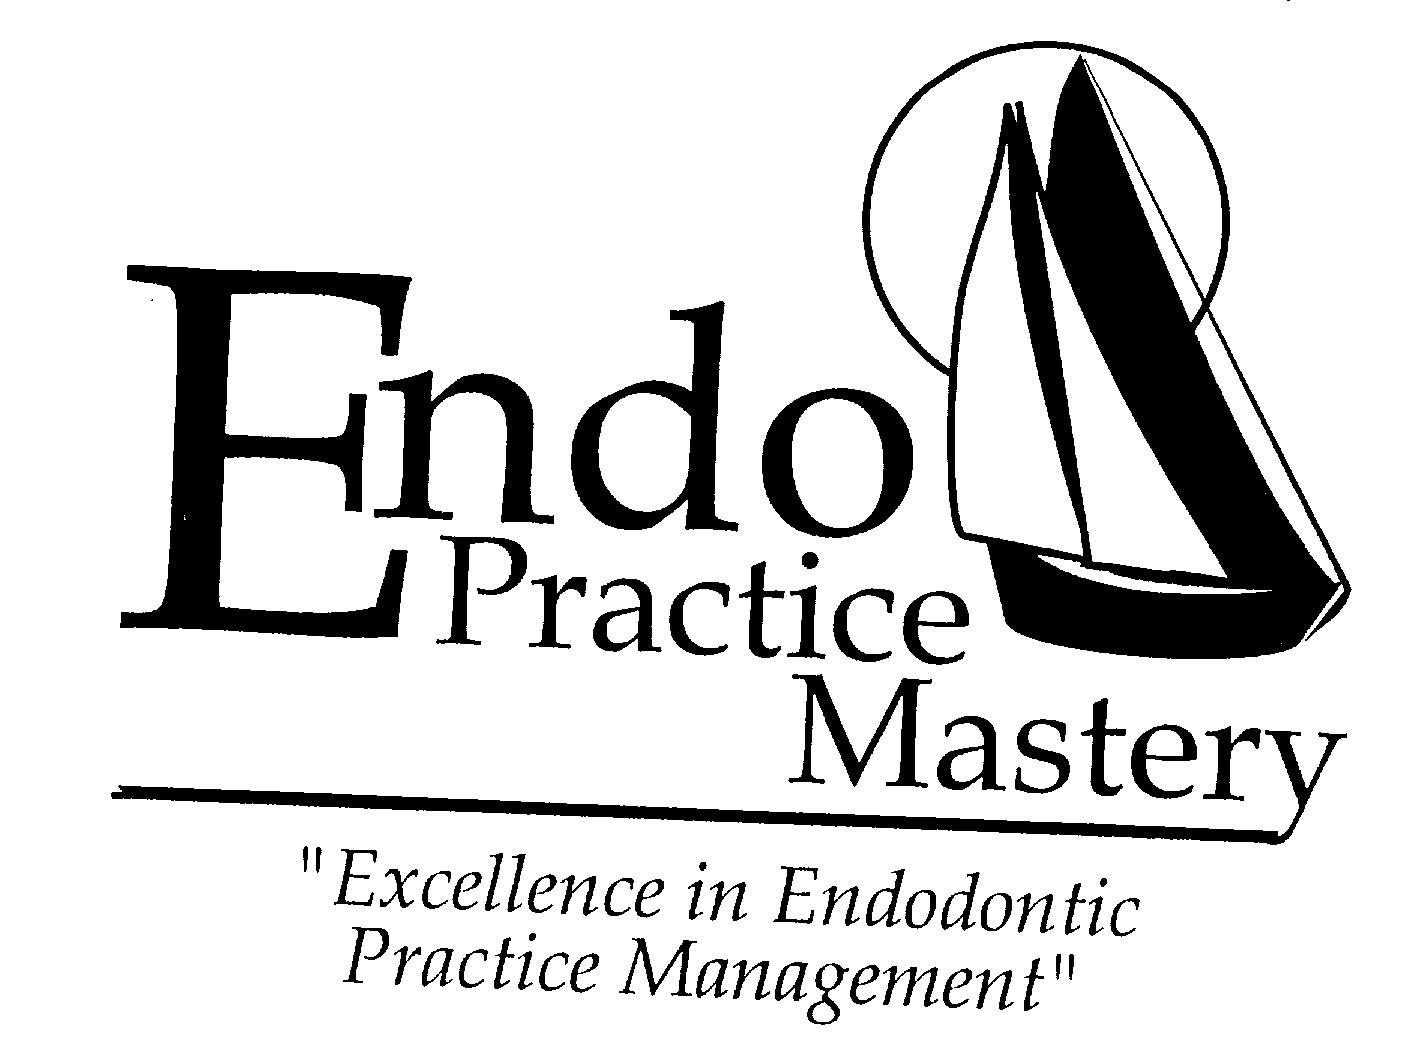  ENDO PRACTICE MASTERY &quot;EXCELLENCE IN ENDODONTIC PRACTICE MANAGEMENT&quot;